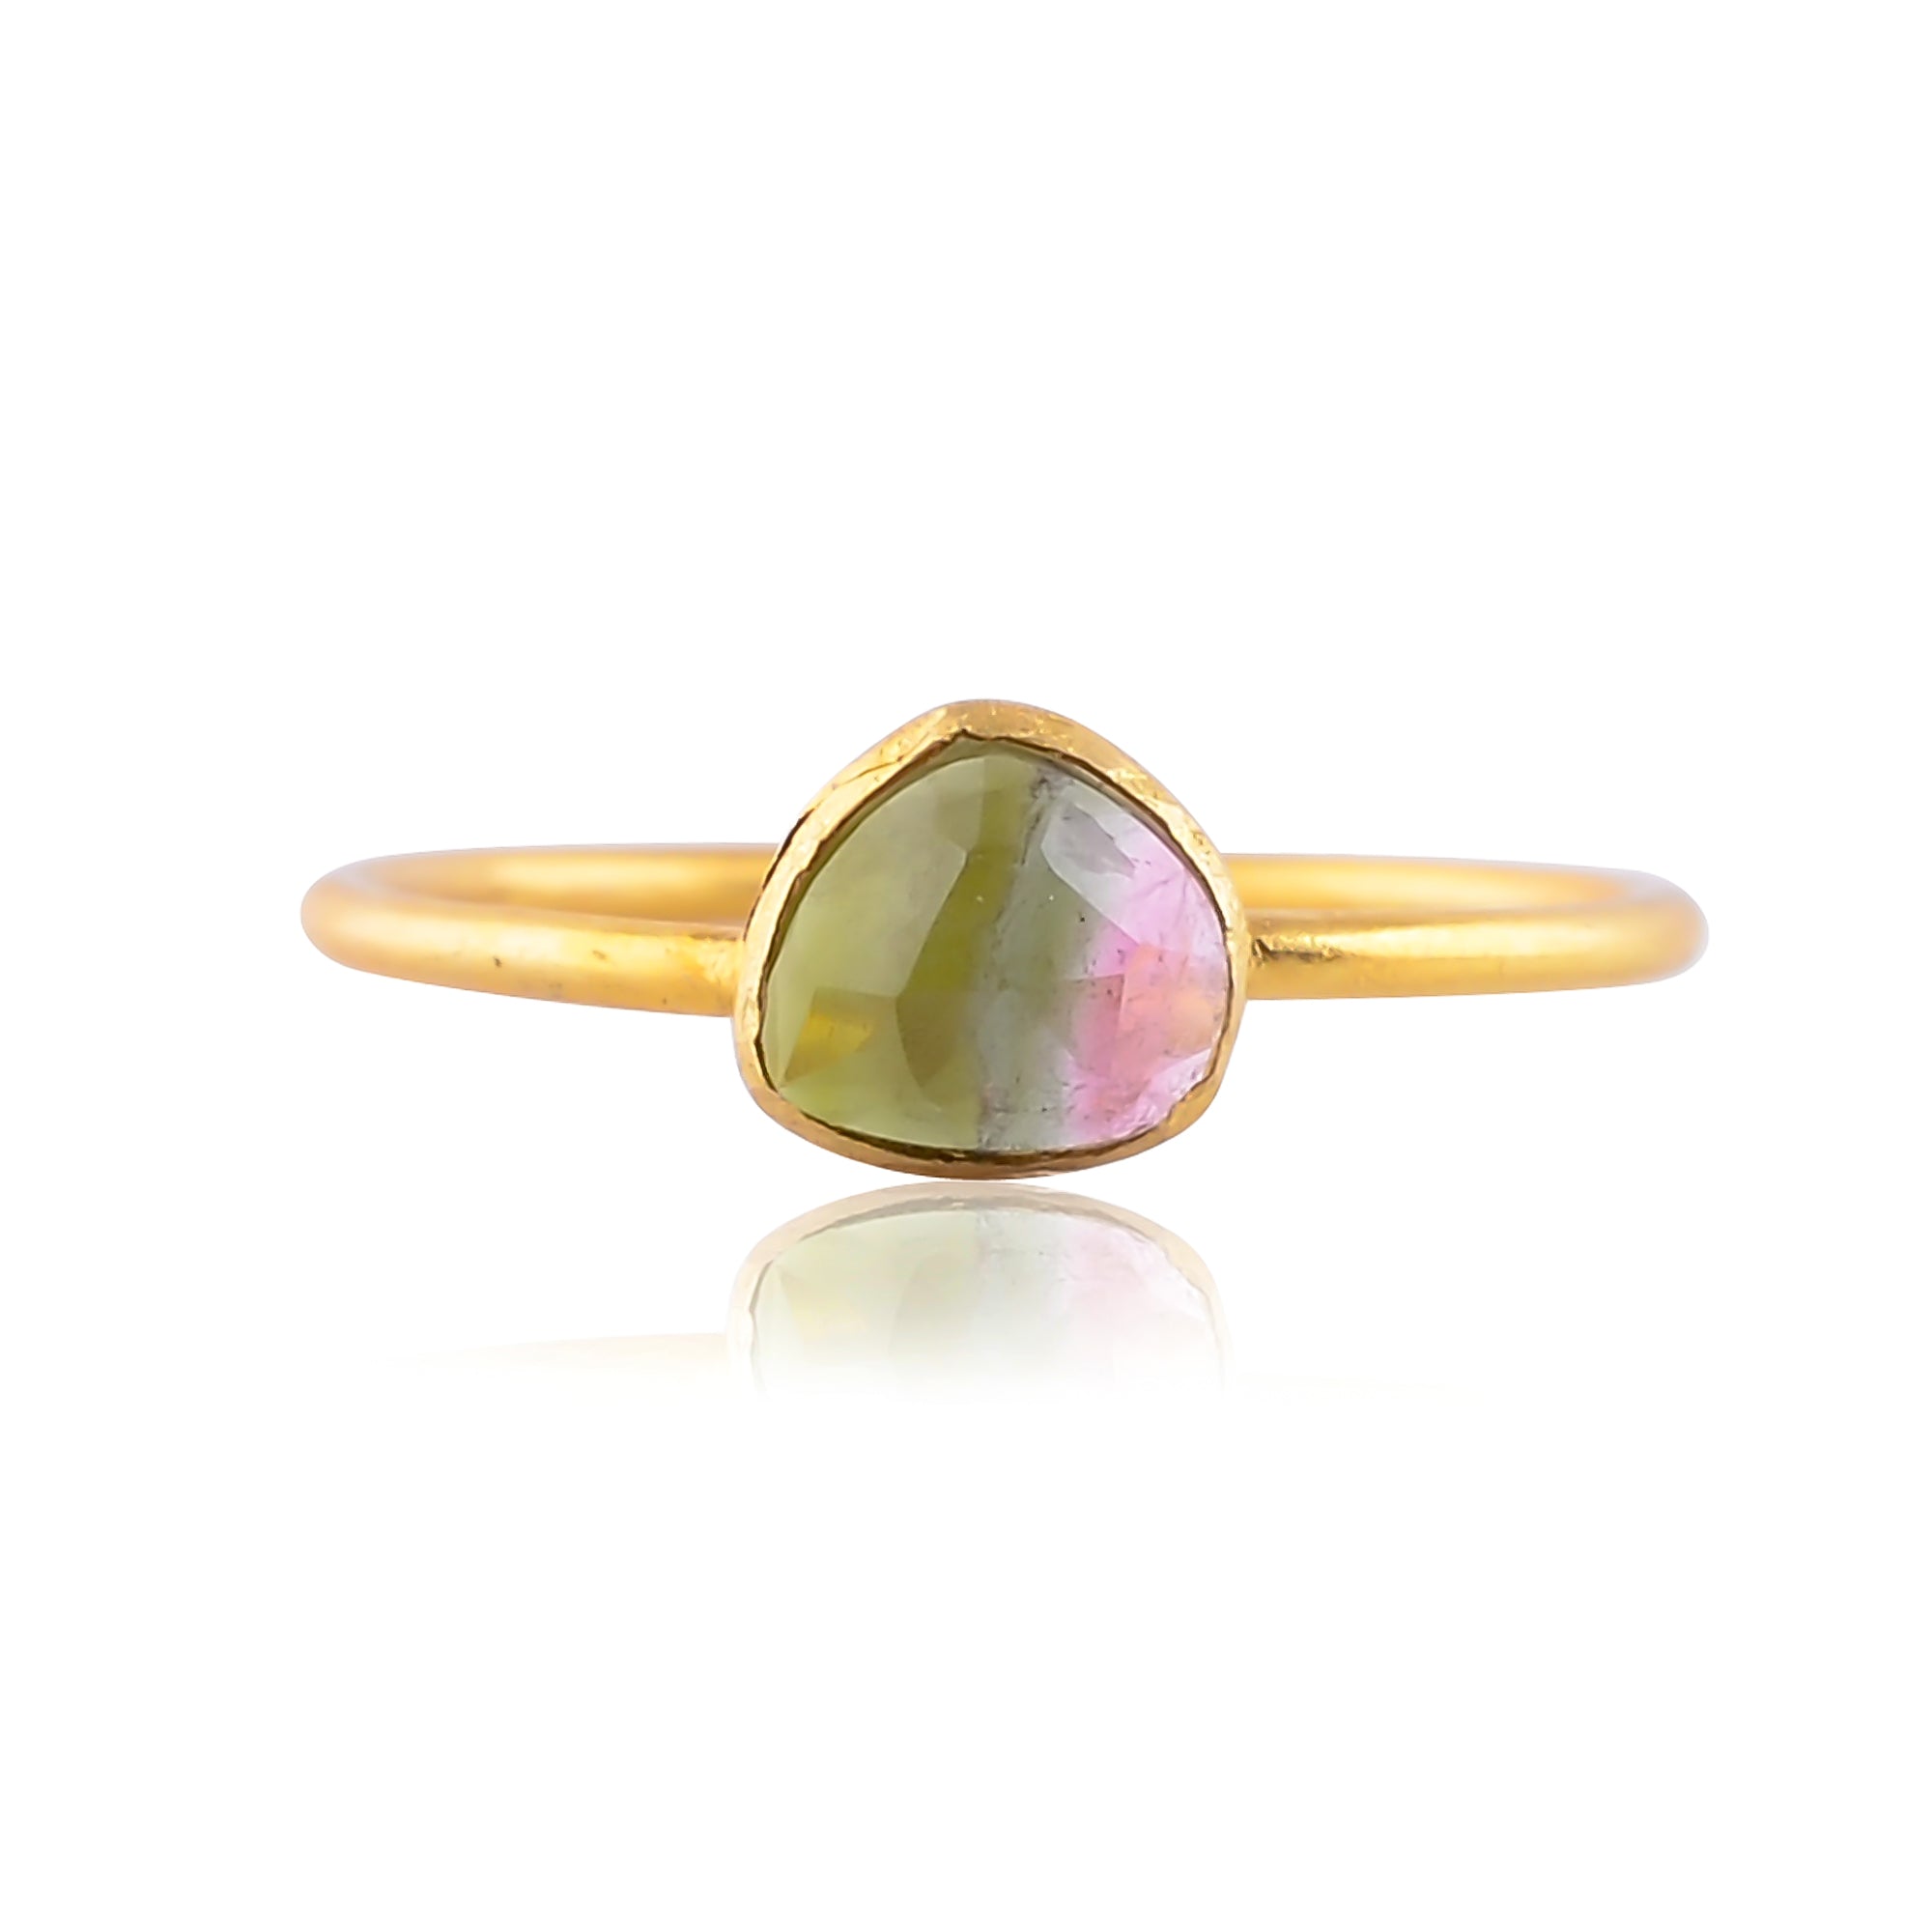 Buy Handcrafted Silver Gold-plated Tourmaline Ring